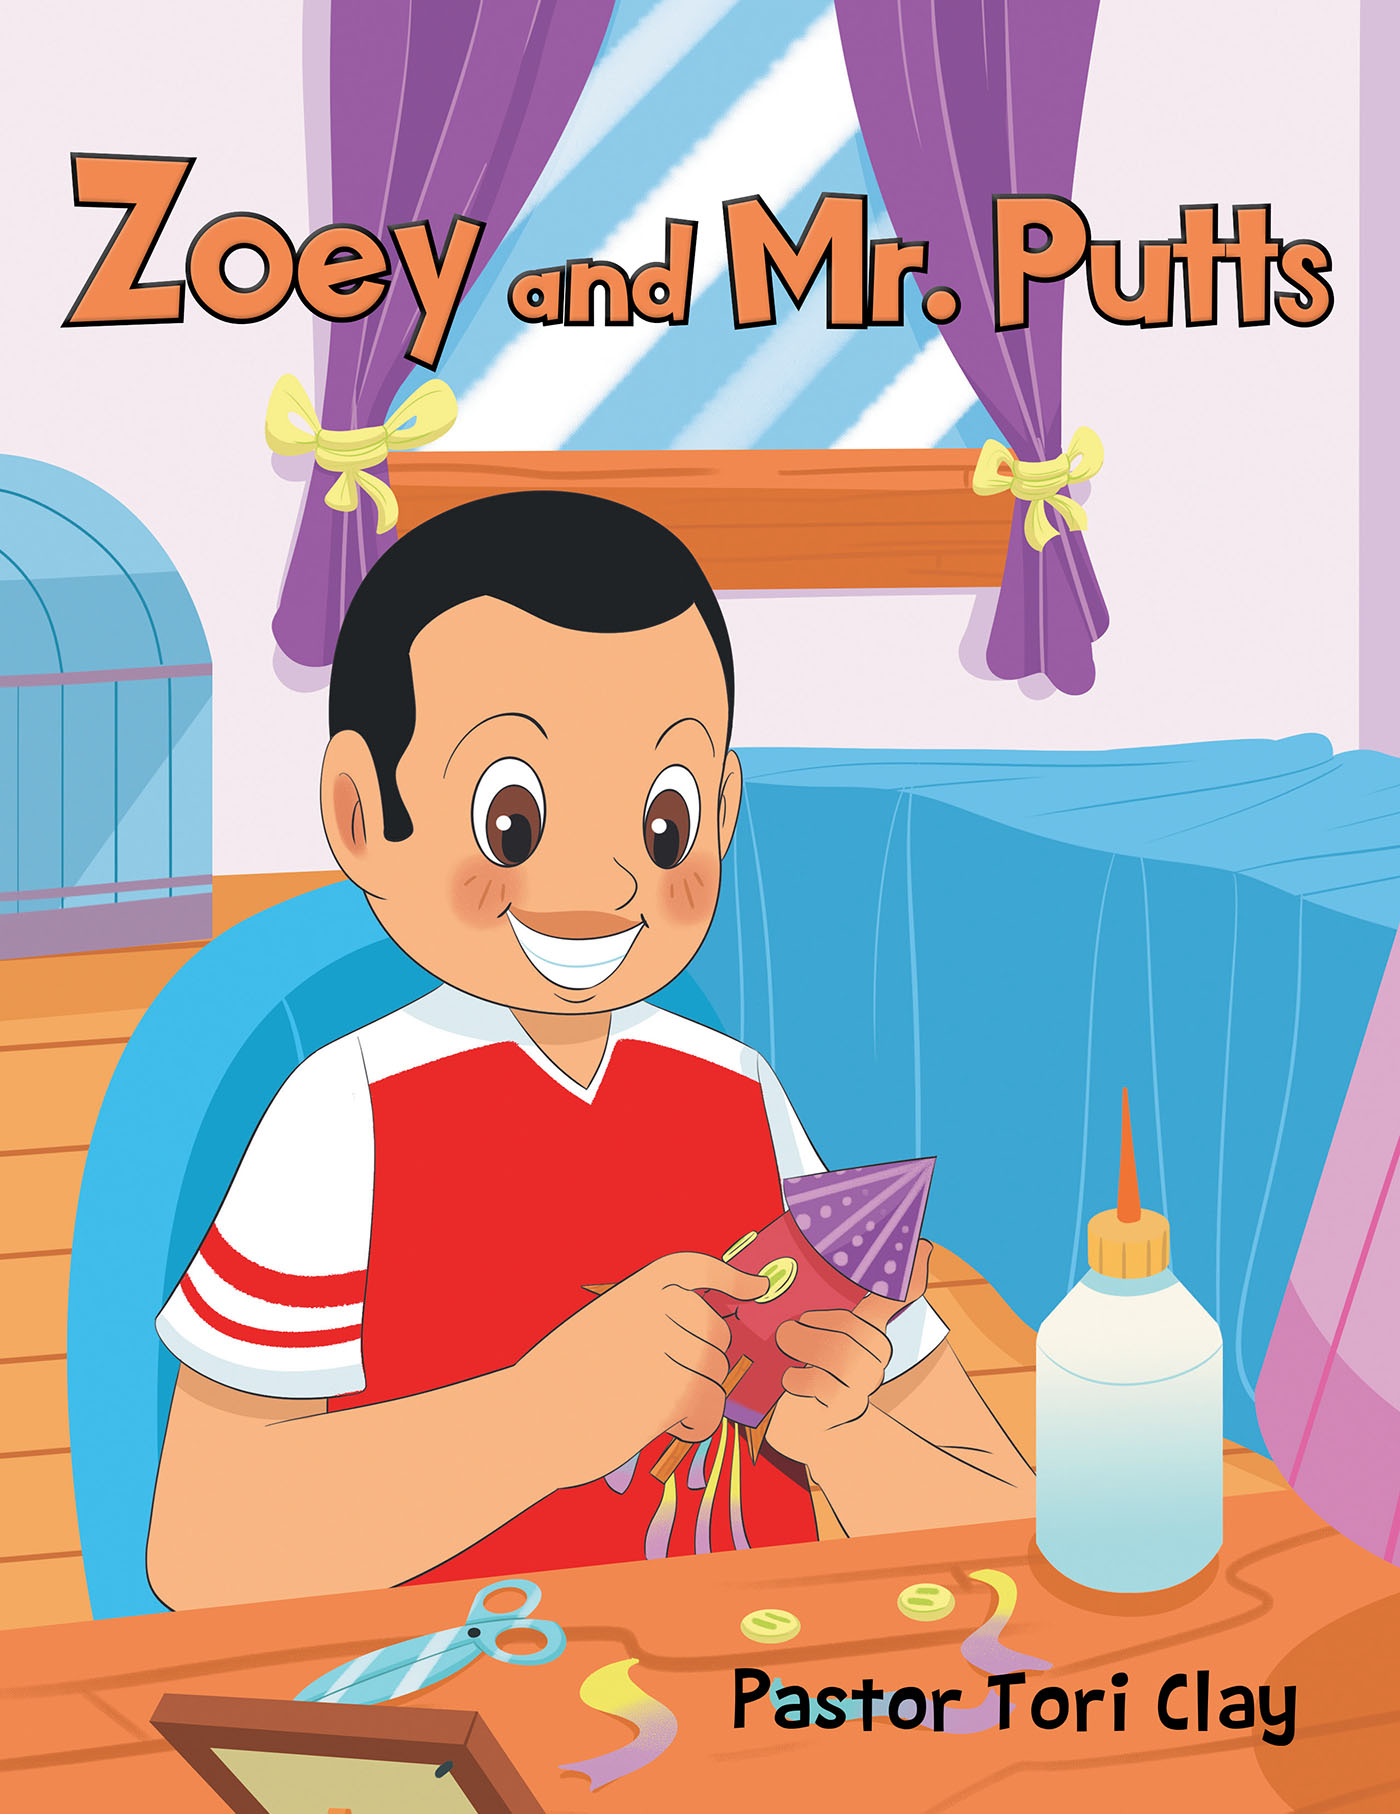 Author Pastor Tori Clay’s New Book, "Zoey and Mr. Putts," is an Original and Endearing Children’s Story About a Boy with Autism